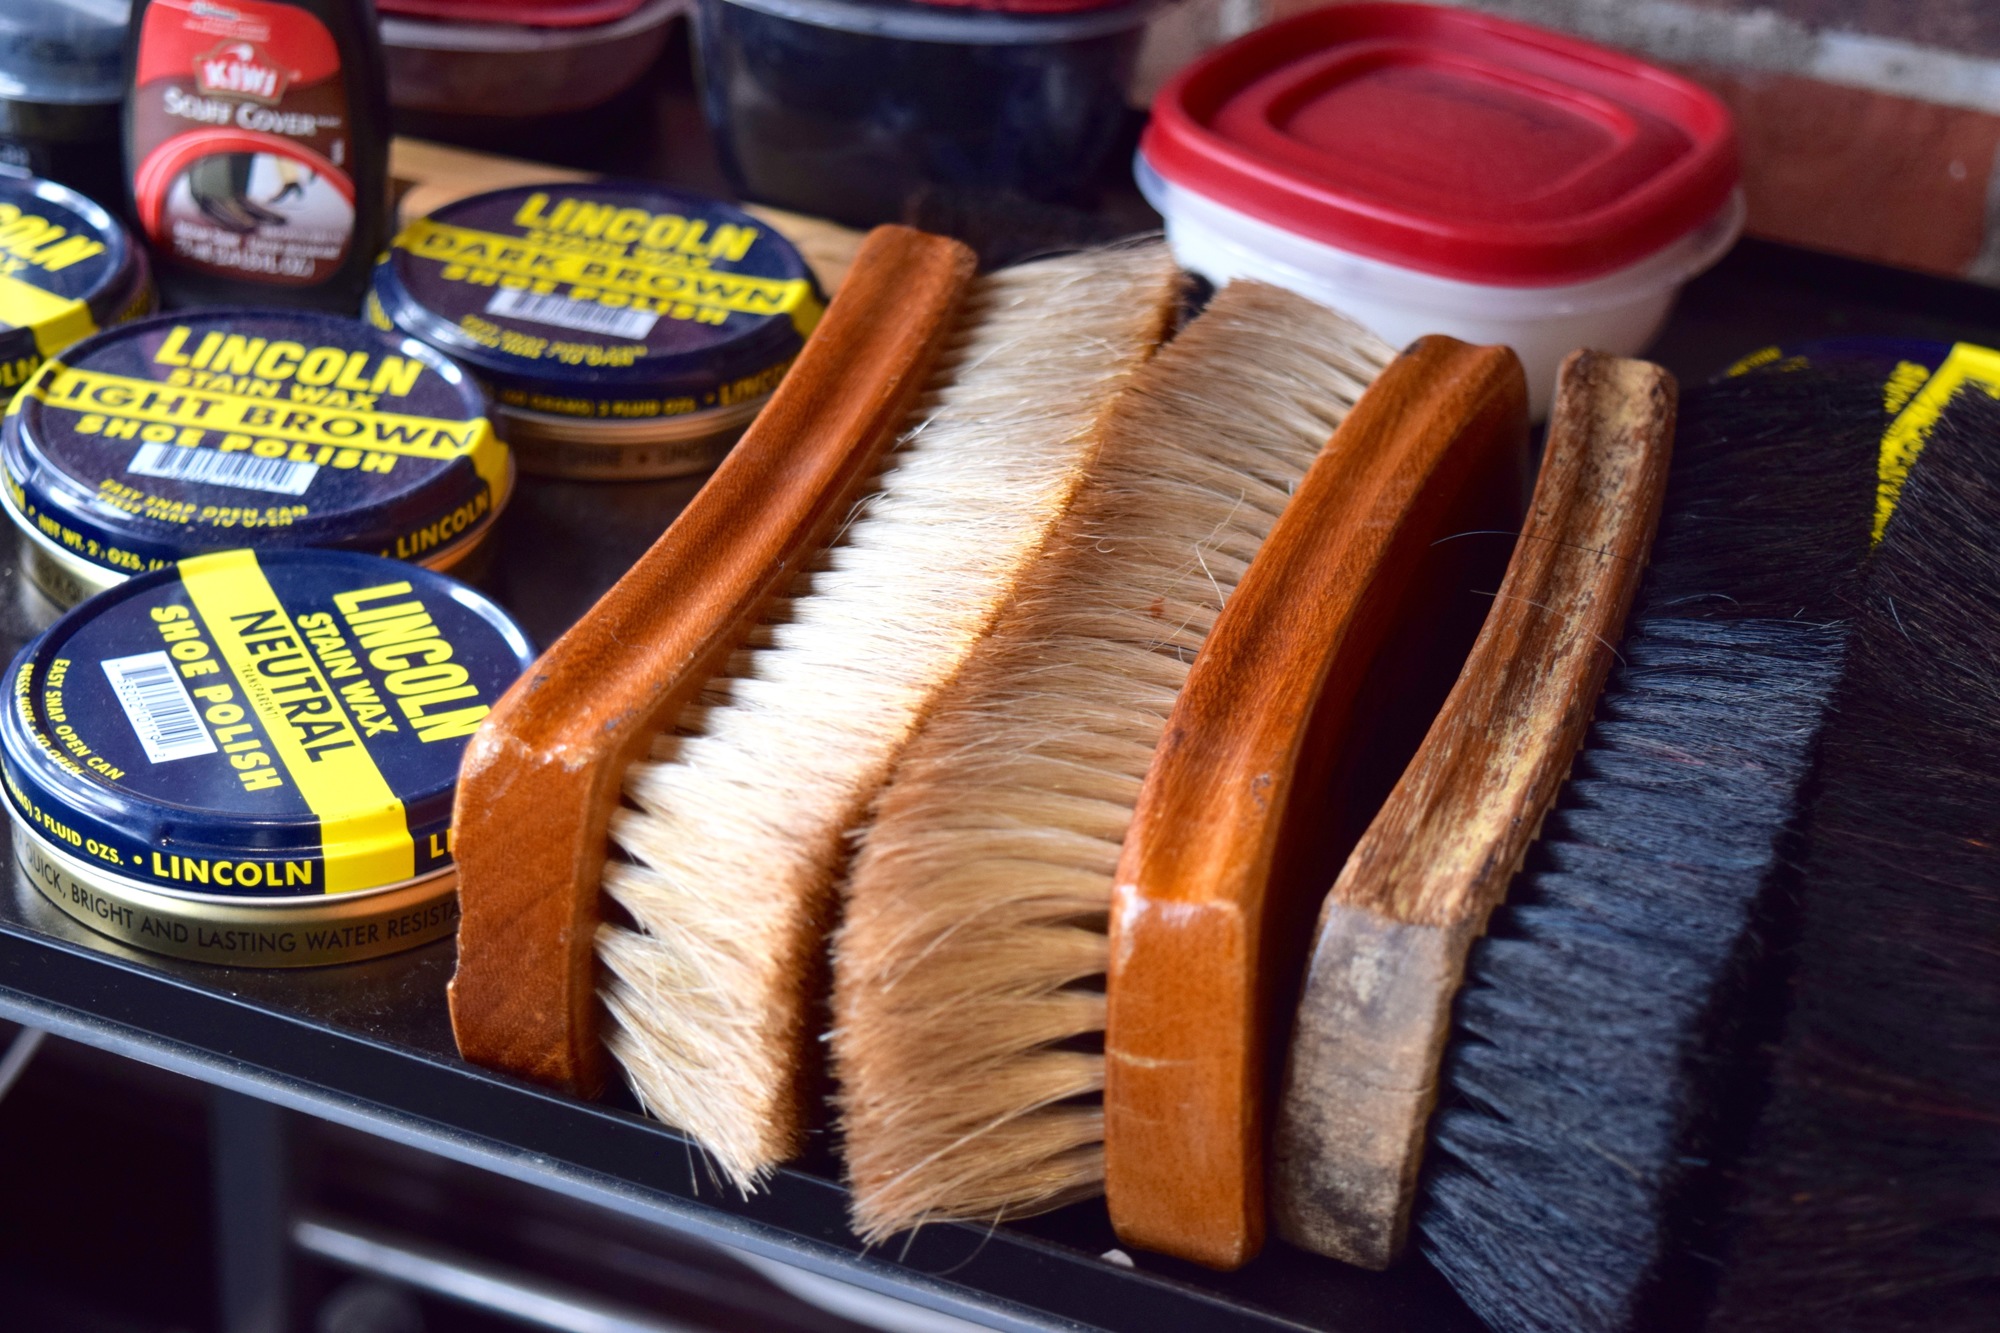 Real horse-hair brushes and various-colored polishes are two of the tools Hector Hidalgo uses in the shoe-shining process.